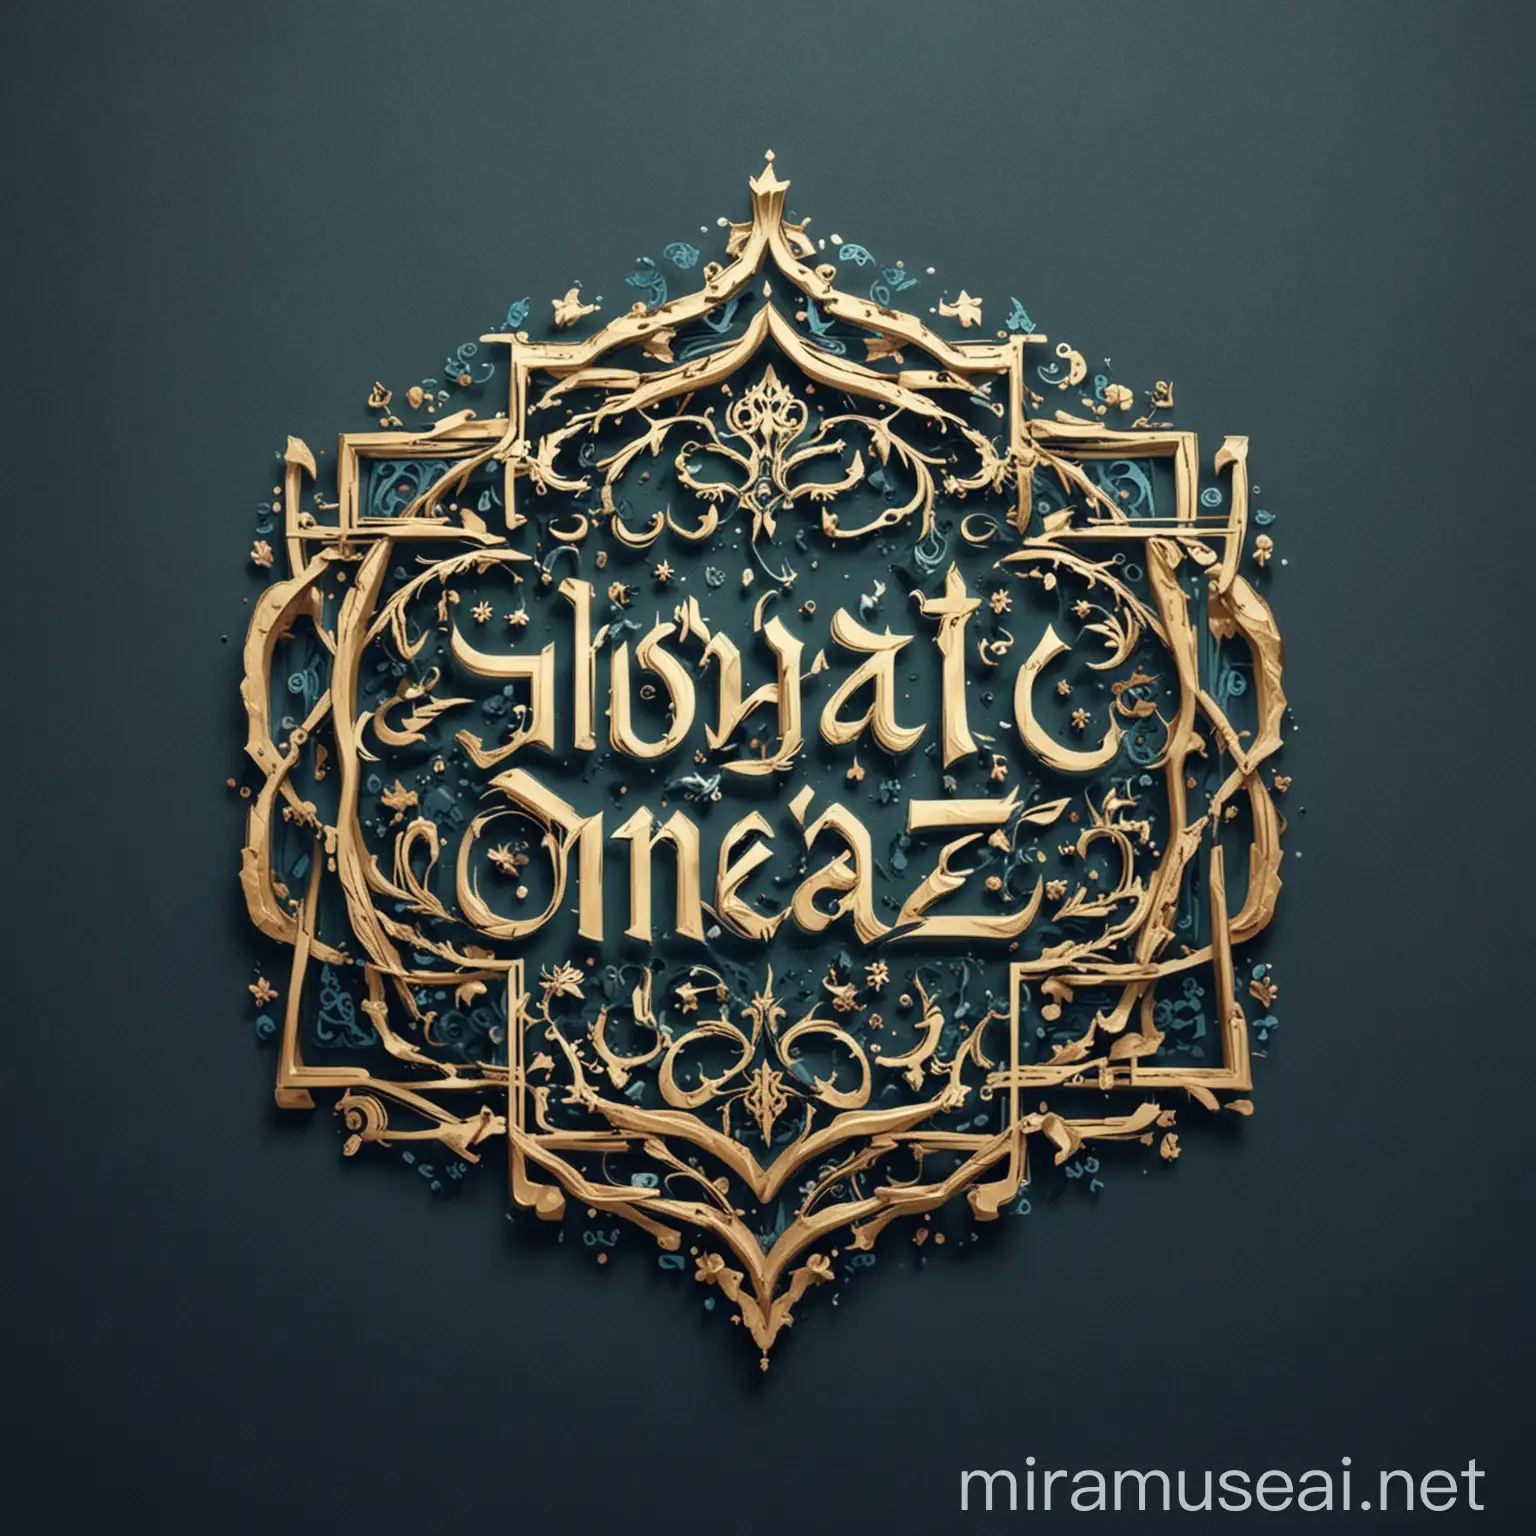 Captivating Islamic Stories The OneNaz Channel Logo Design